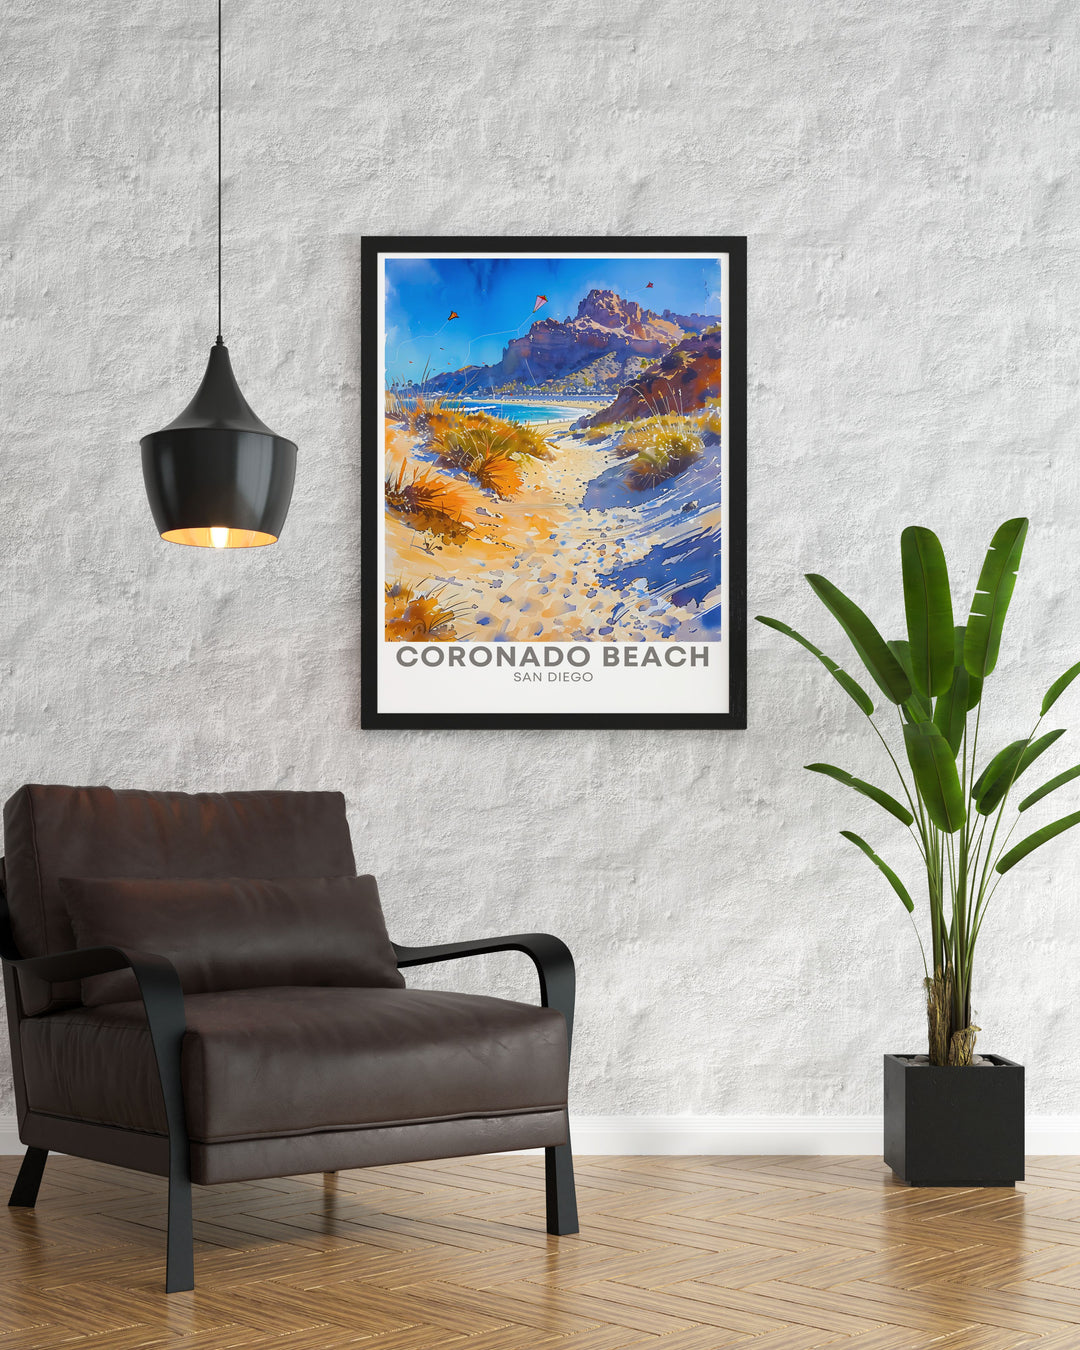 Our Vail Ski Poster and Sand Dunes Artwork make the perfect Colorado Gift for any occasion. This beautiful piece of Colorado Decor is ideal for birthdays anniversaries or holidays offering a unique blend of adventure and natural beauty.